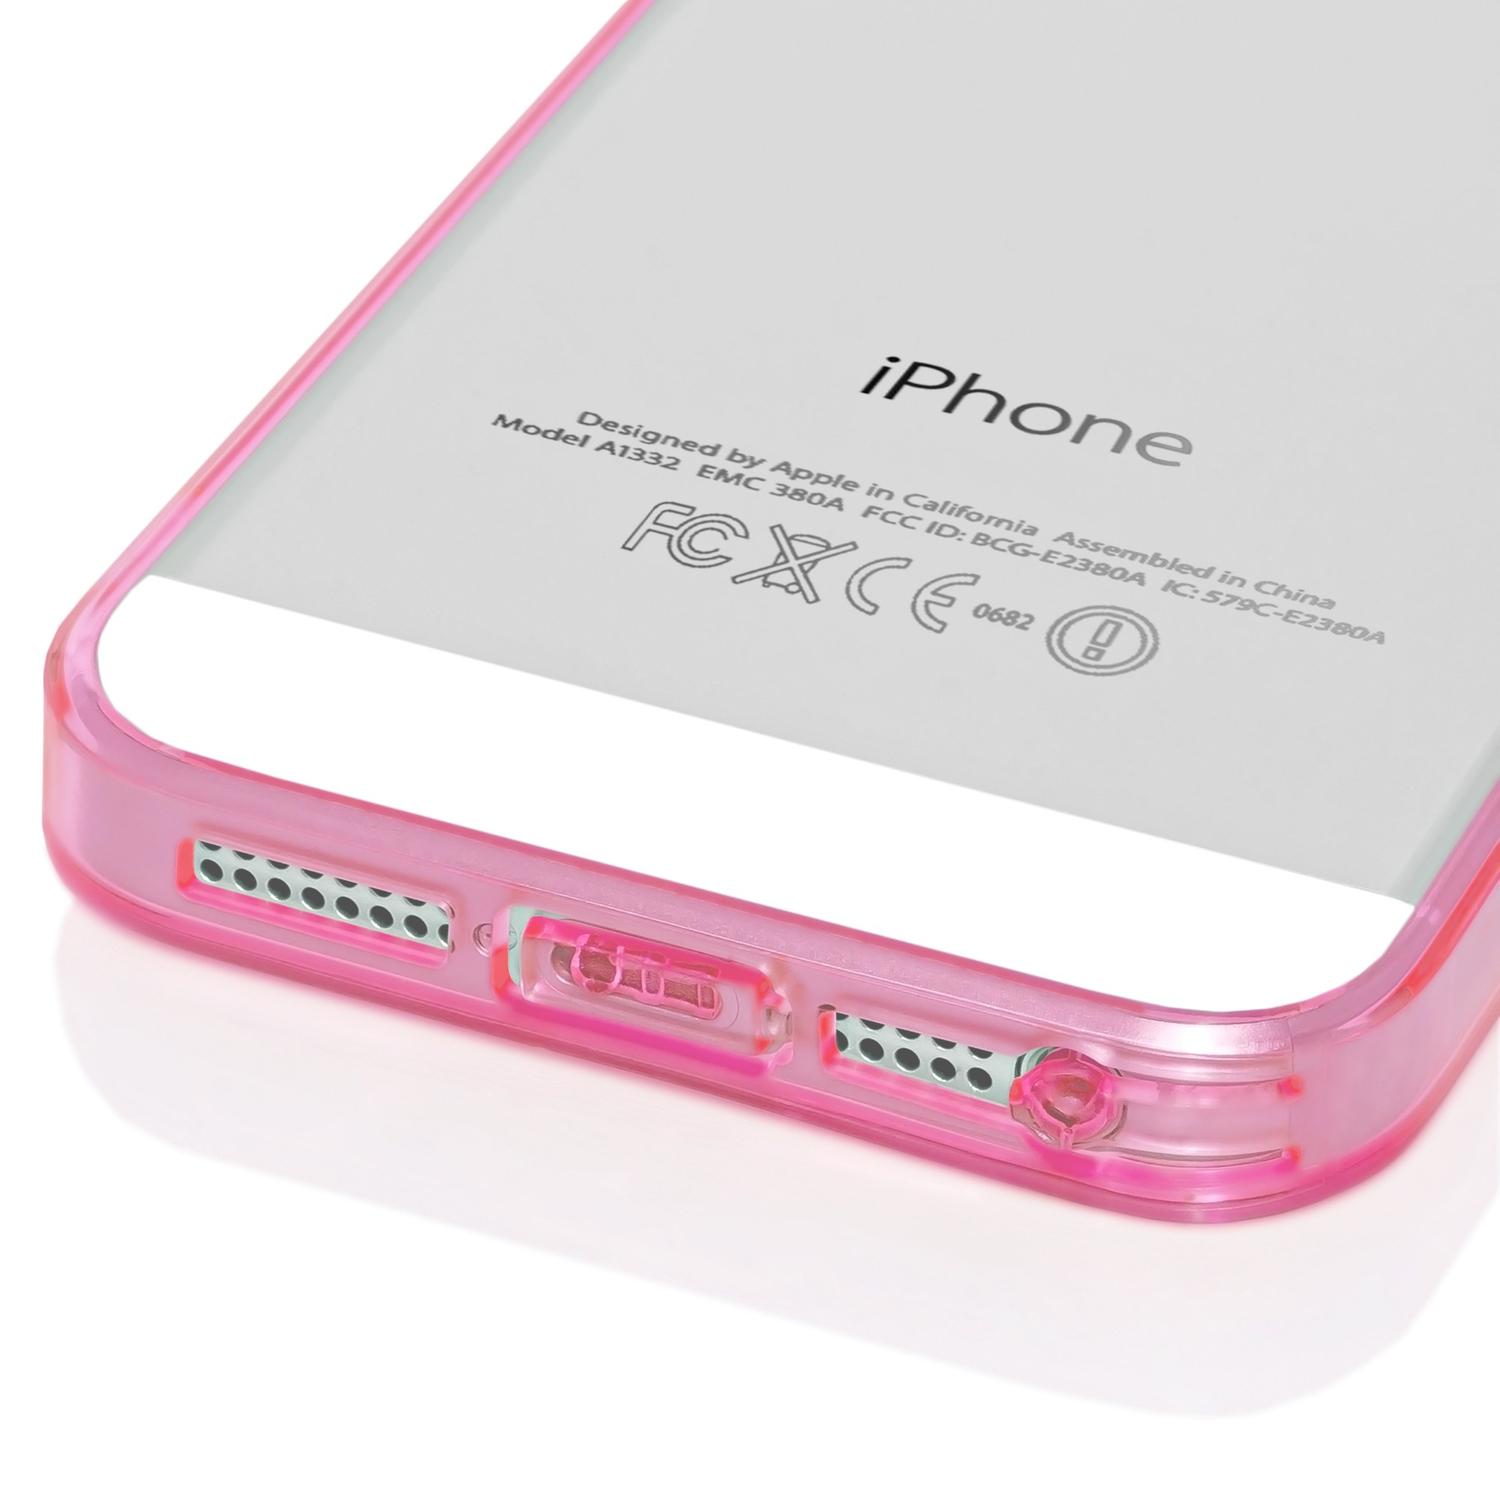 NALIA Klare Hülle, Backcover, Apple, iPhone SE Generation) Pink (1. iPhone iPhone 5s, 5